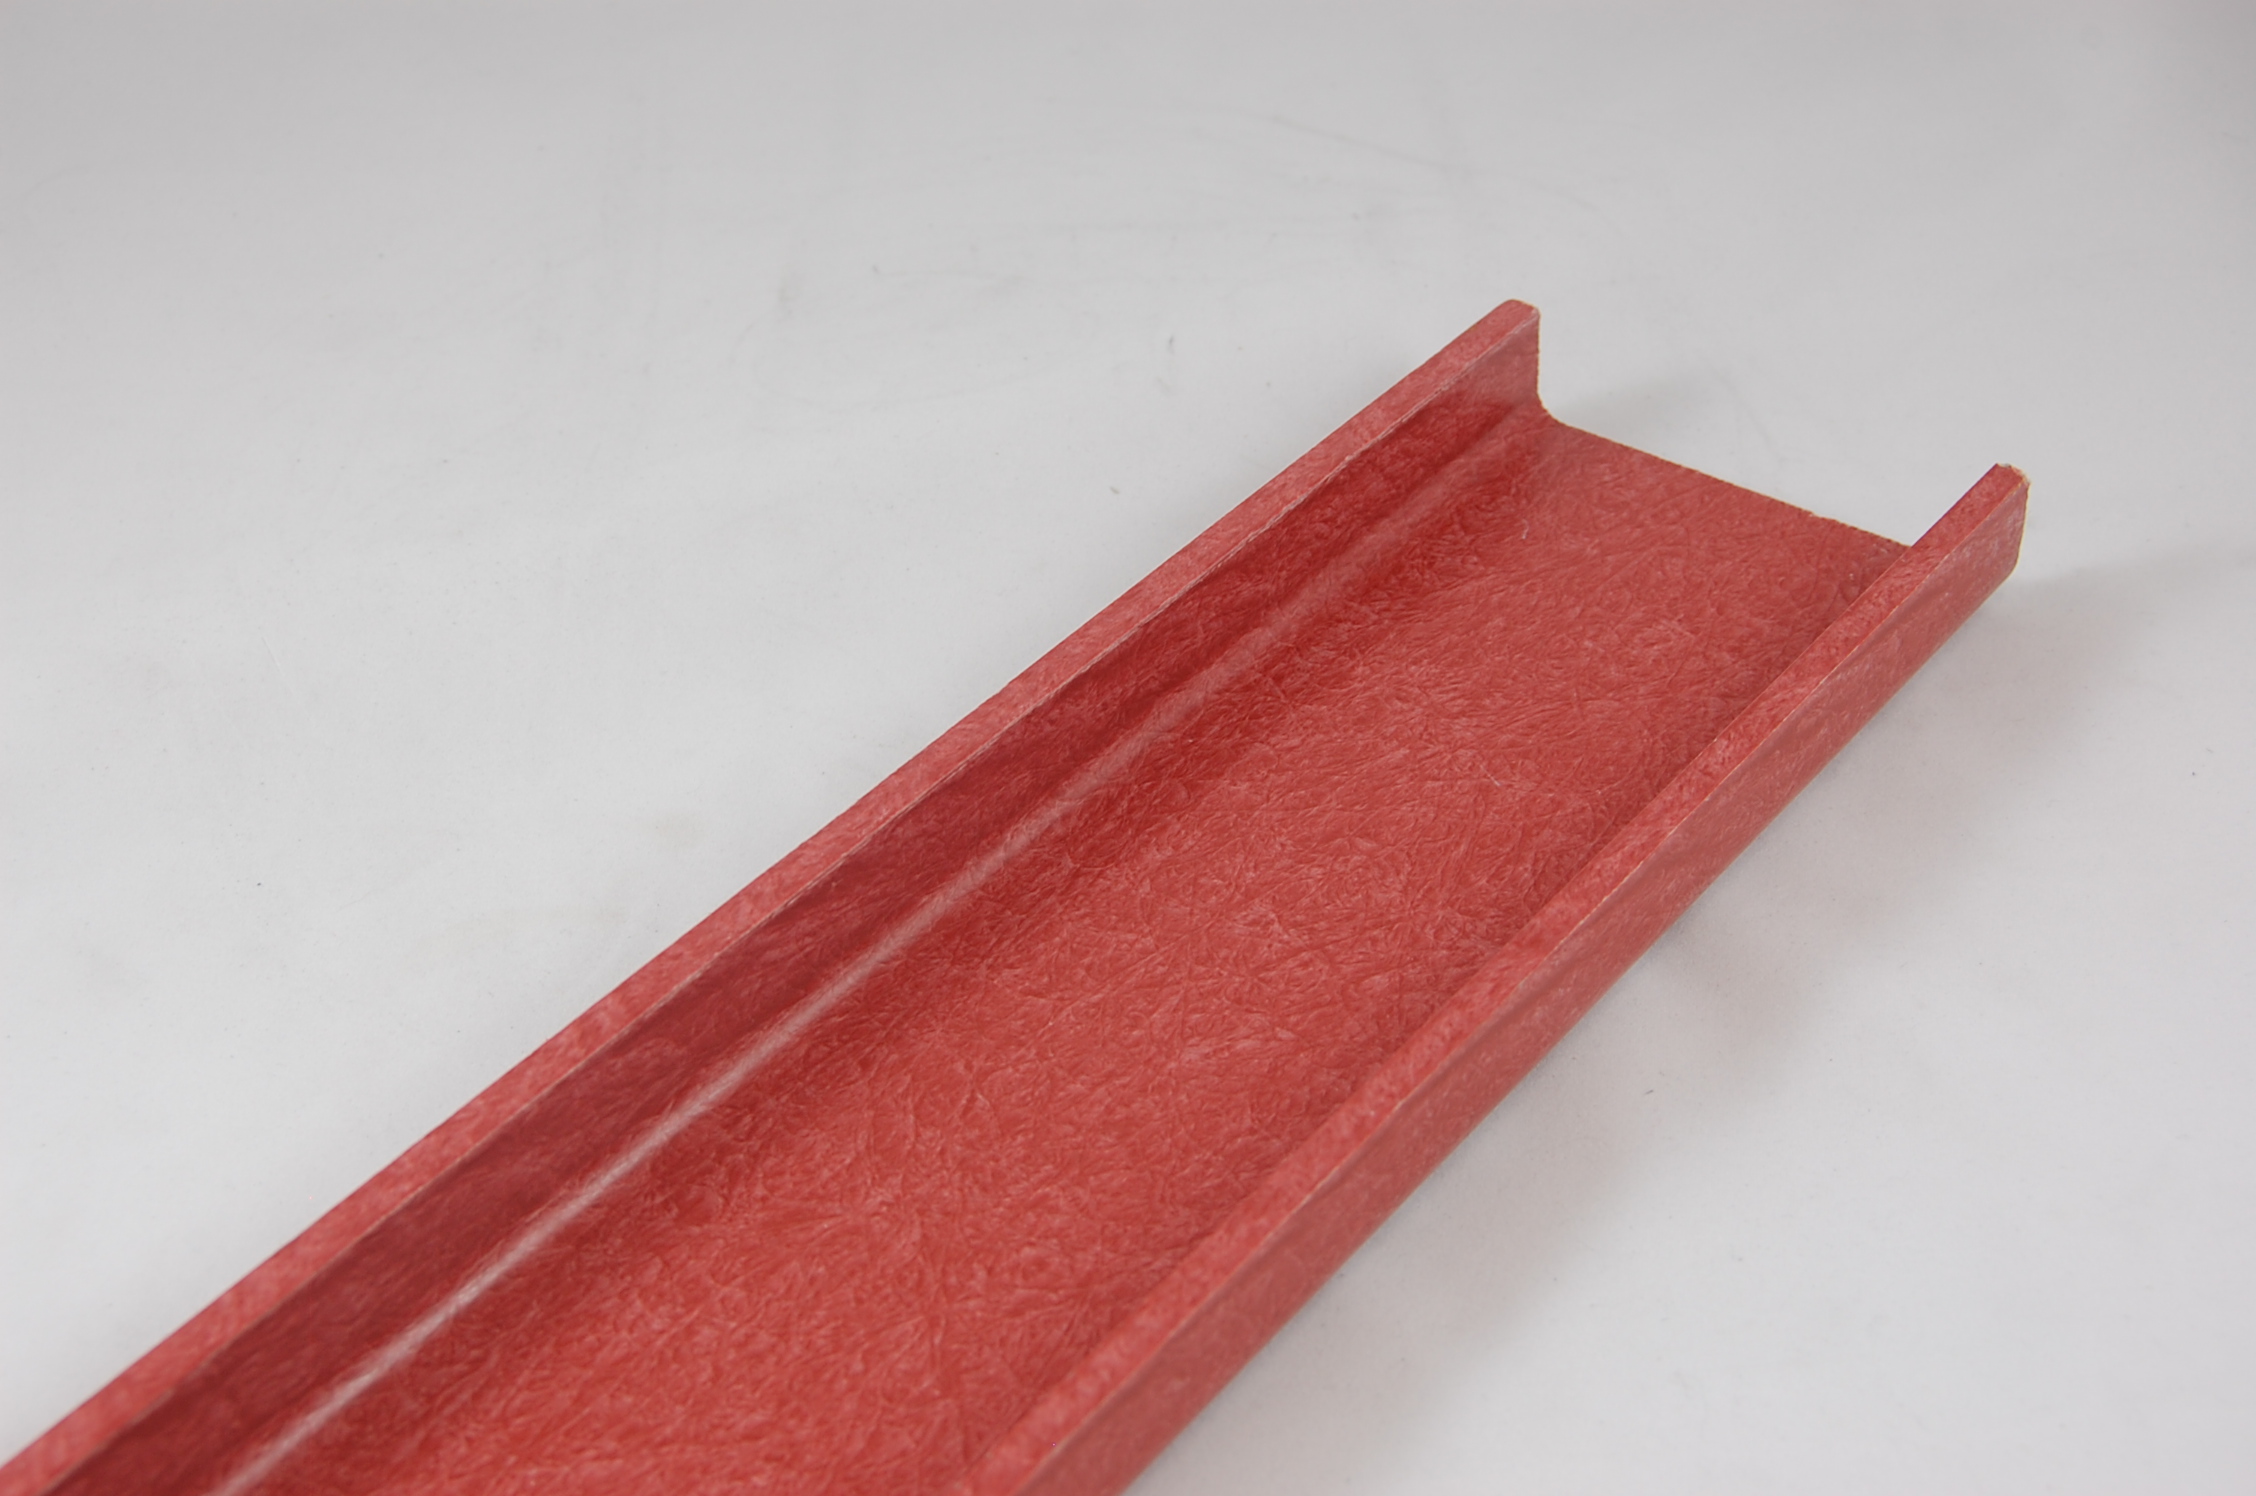 2-5/16"W x 3/4" Leg x 1/8" thick GLASROD® Grade 1130 Fiberglass-Reinforced Polyester Laminate Channel, red,  120"L channel